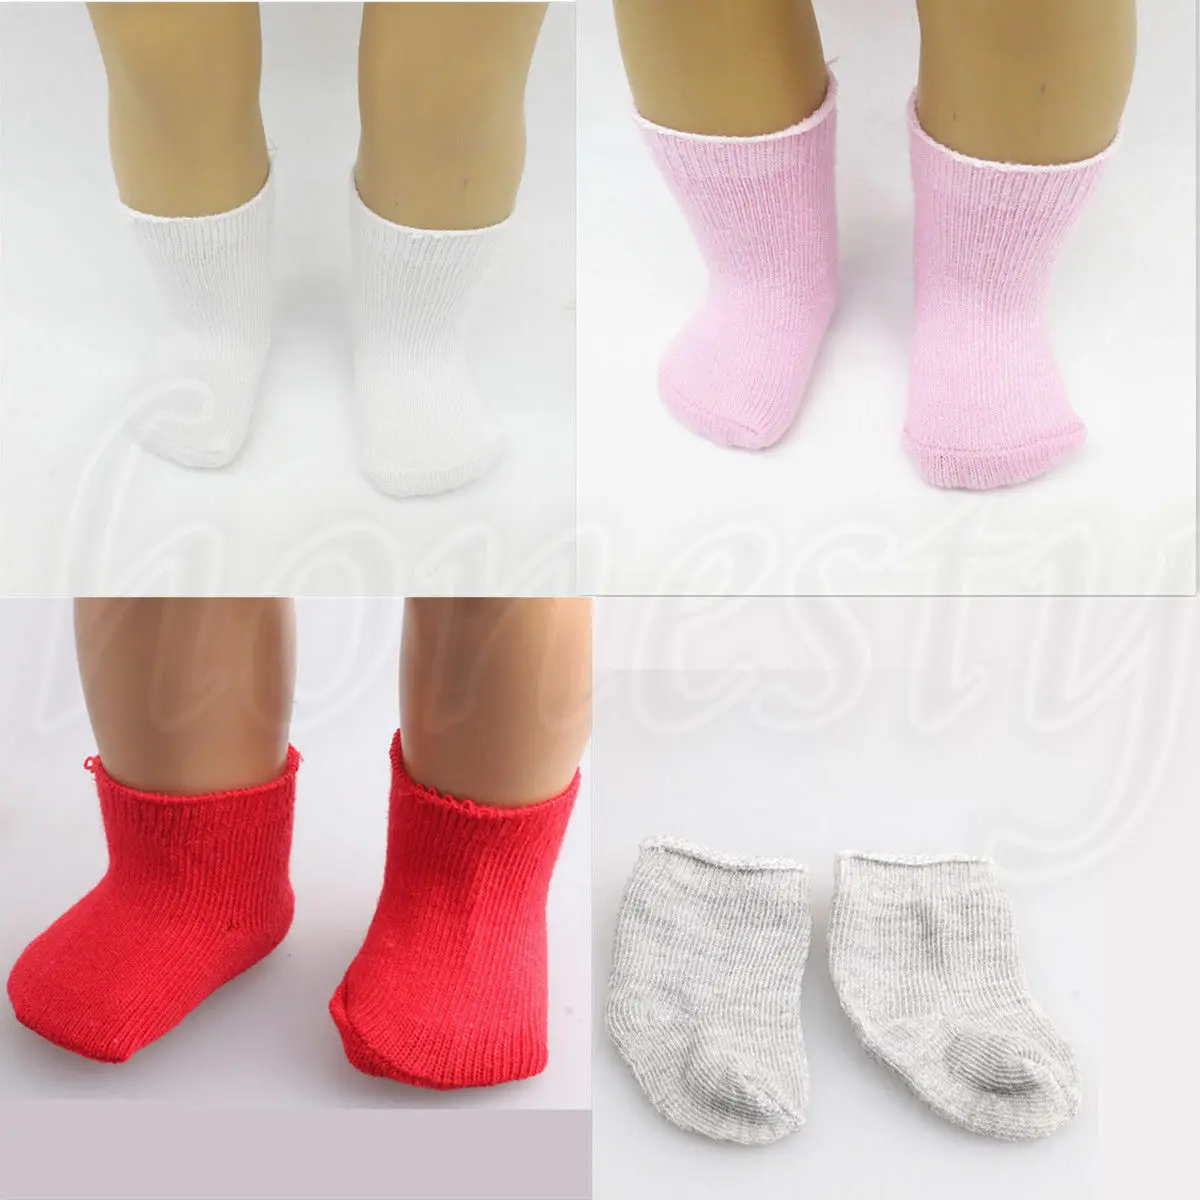 Doll Socks Stockings Fit for 18" American Girl My Life Doll Clothing Accessories